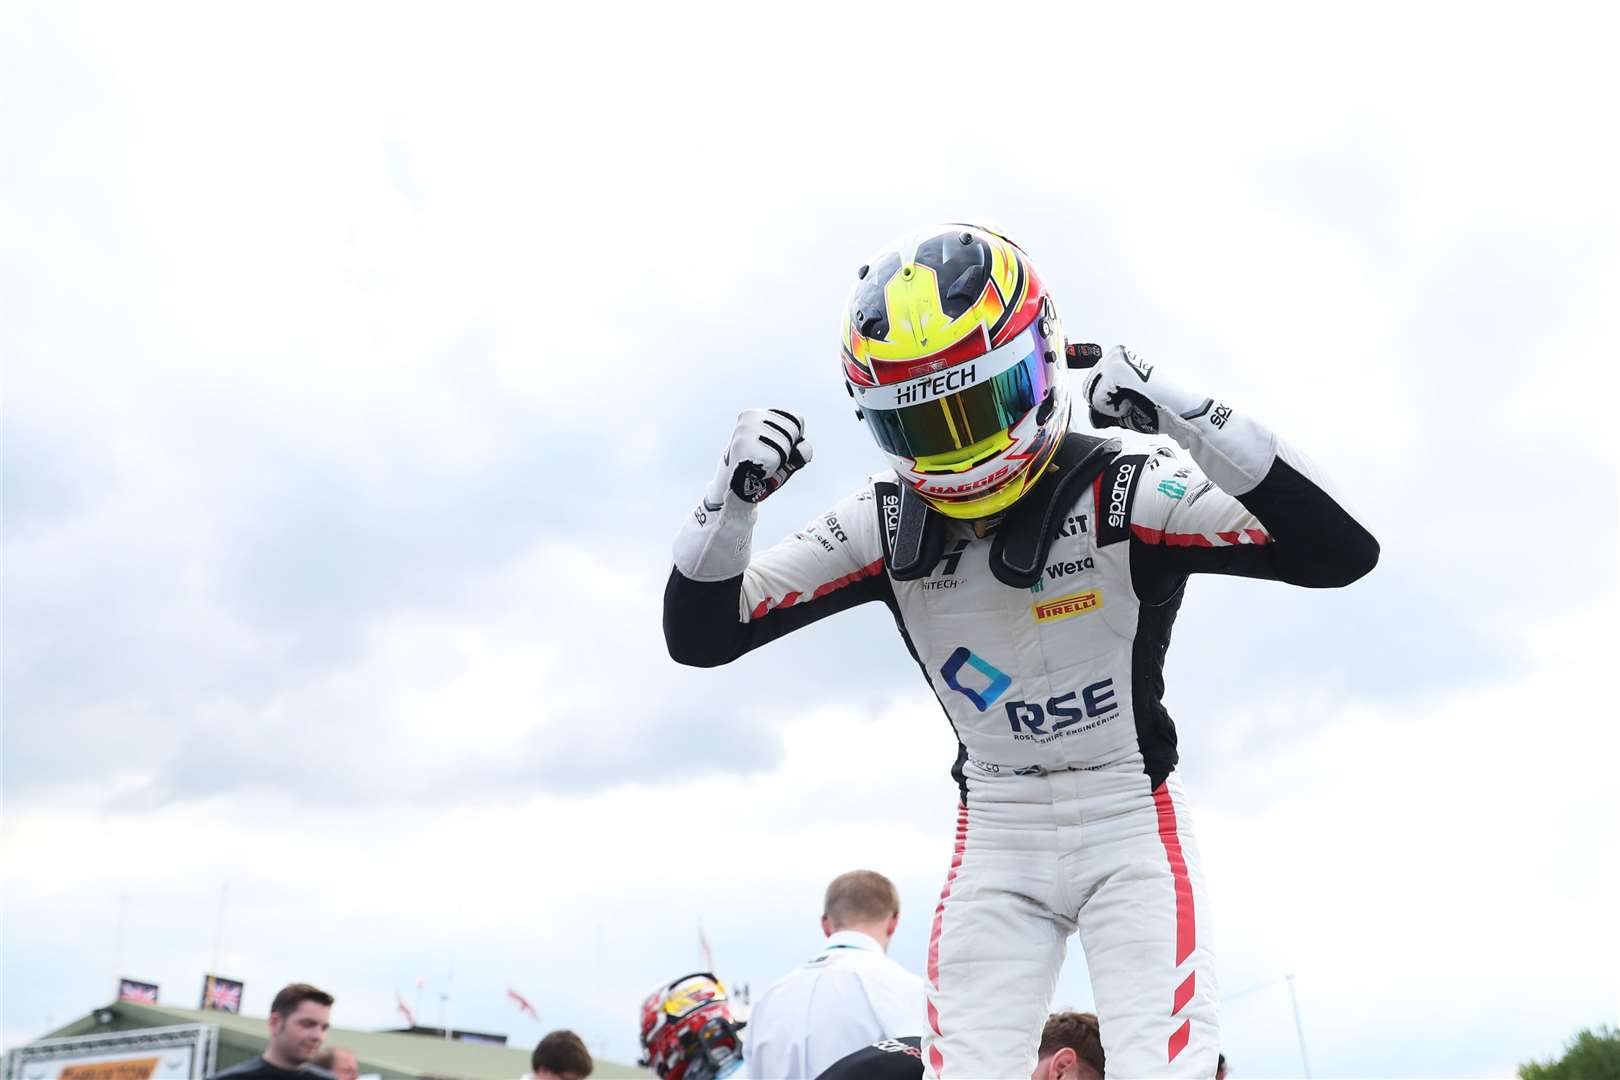 15-year-old Stewart claimed his first overall win in the British F4 Championship.